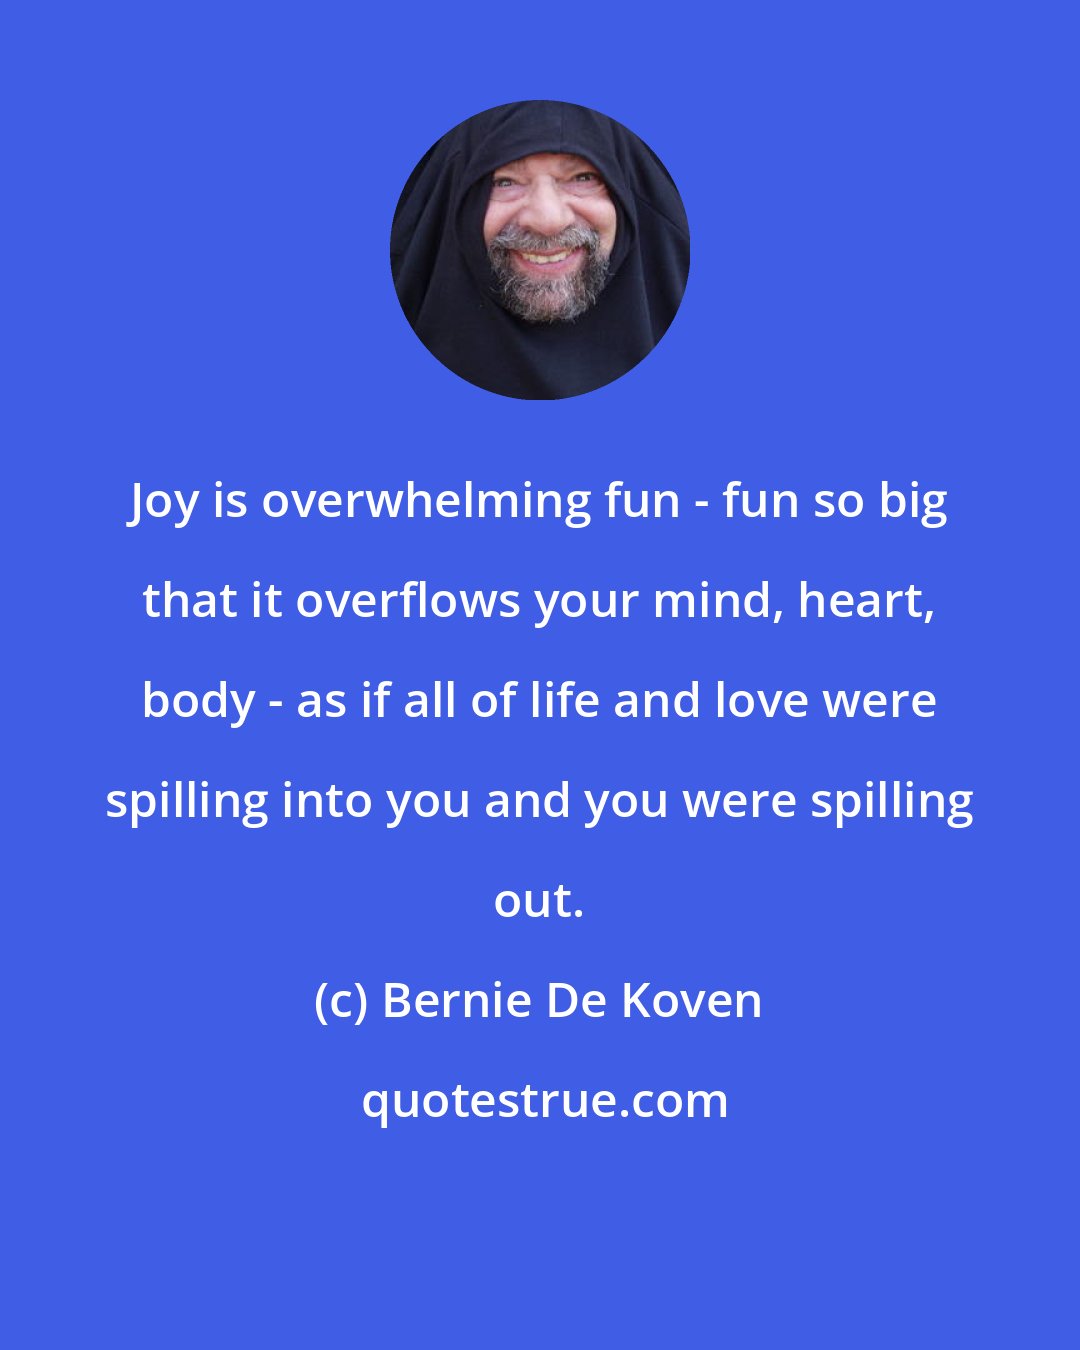 Bernie De Koven: Joy is overwhelming fun - fun so big that it overflows your mind, heart, body - as if all of life and love were spilling into you and you were spilling out.